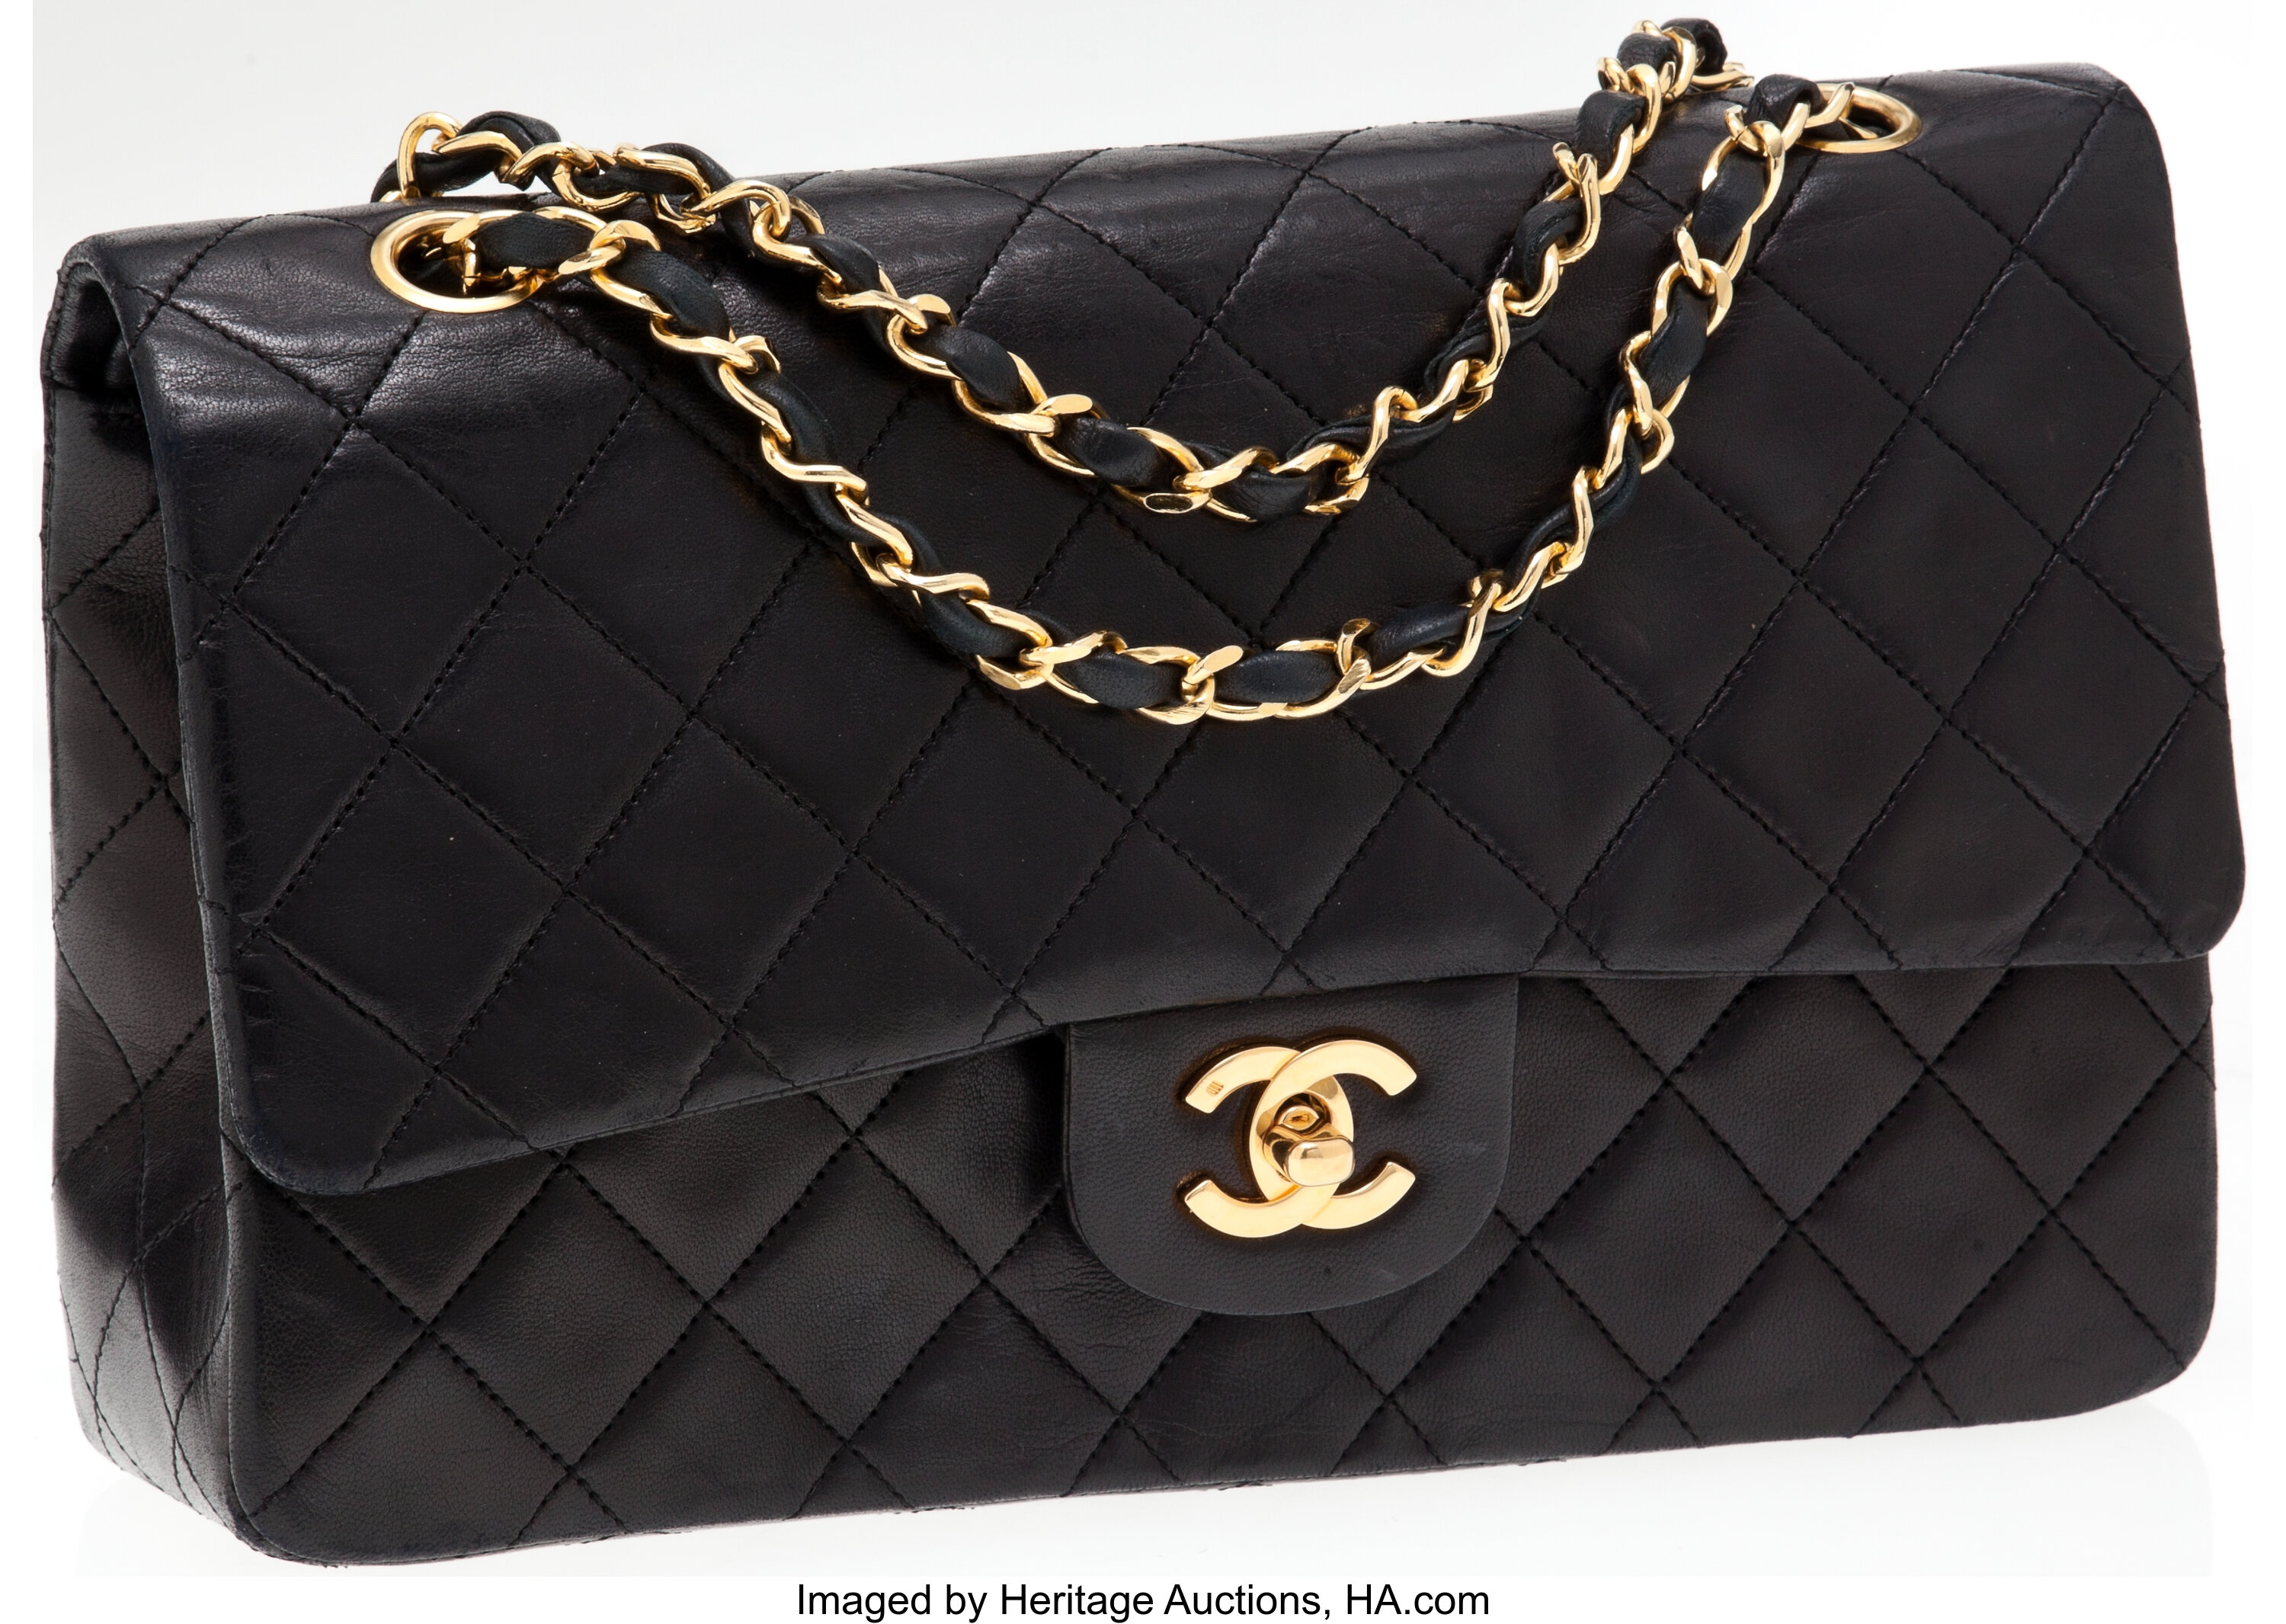 CHANEL, VINTAGE 2.55 FLAP BAG BLACK LAMBSKIN WITH GOLD HARDWARE, CIRCA 1970, Handbags and Accessories, 2020